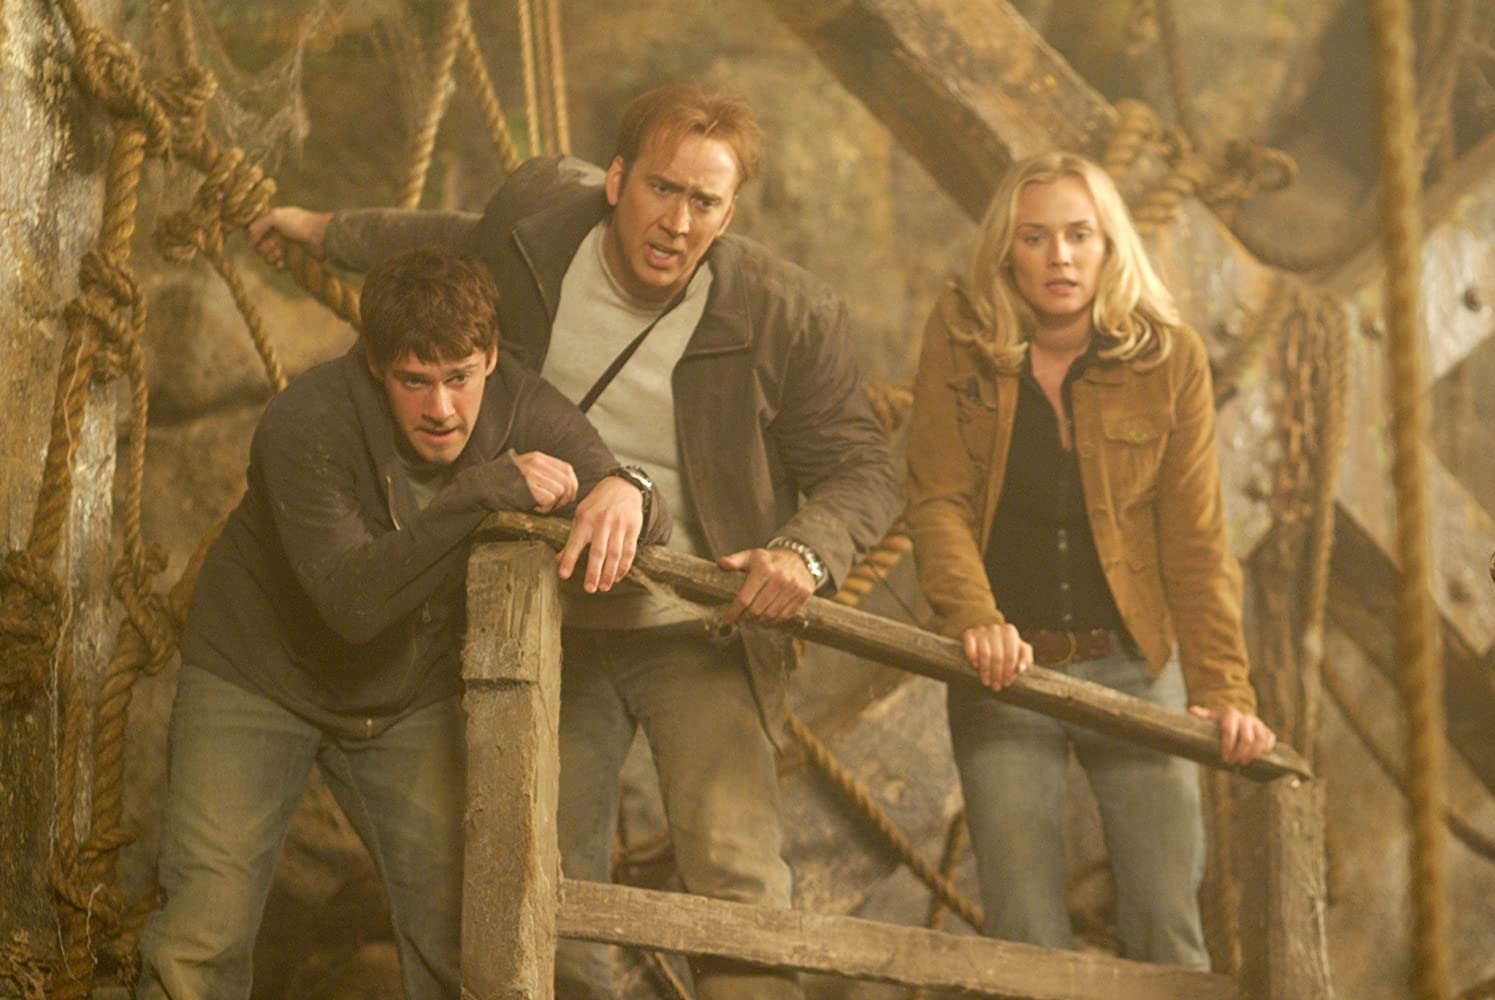 National Treasure: Riley Poole, Ben Gates, and Dr. Abigail Chase stand precariously on an ancient wooden structure.